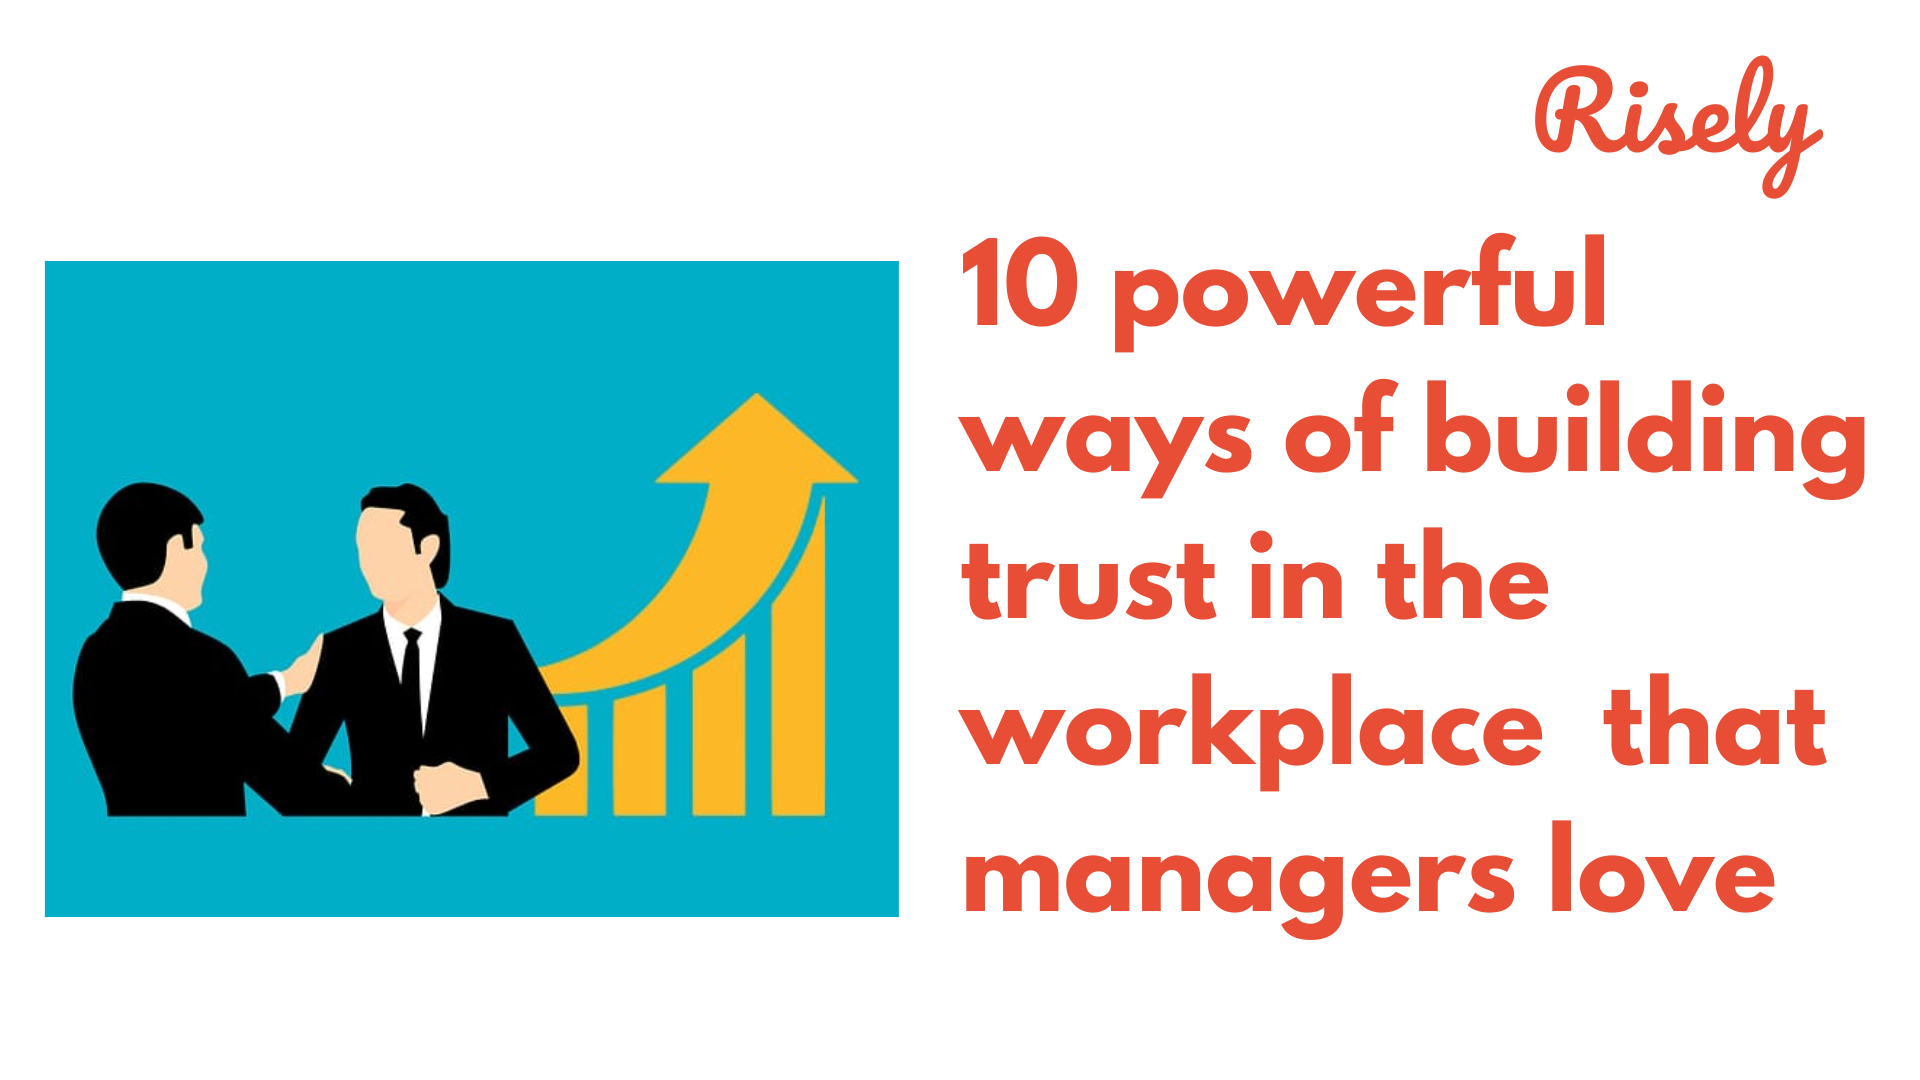 10 powerful ways of building trust in the workplace  that managers love